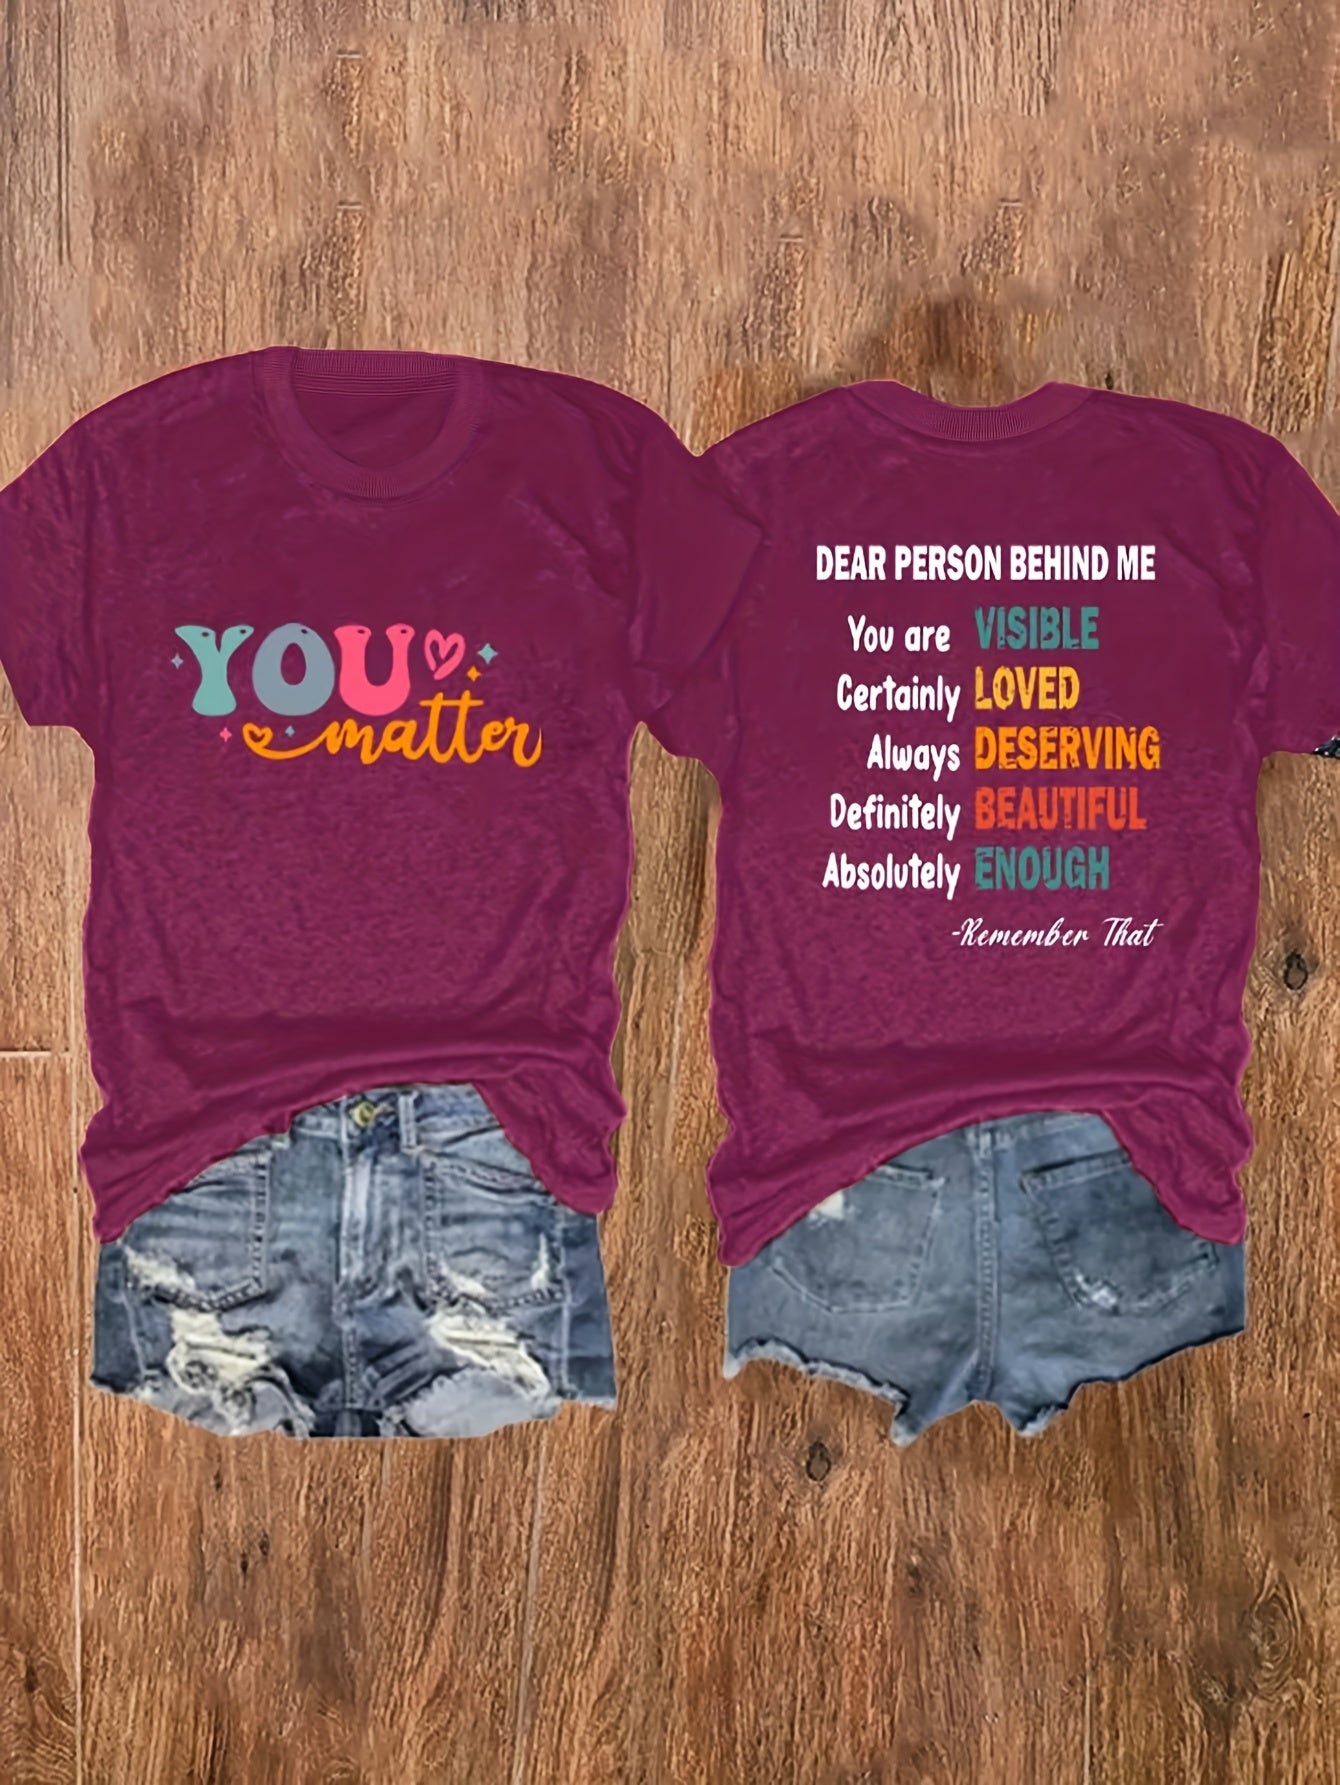 Dear Person Behind Me, You Matter Plus Size Women's Christian T-shirt claimedbygoddesigns